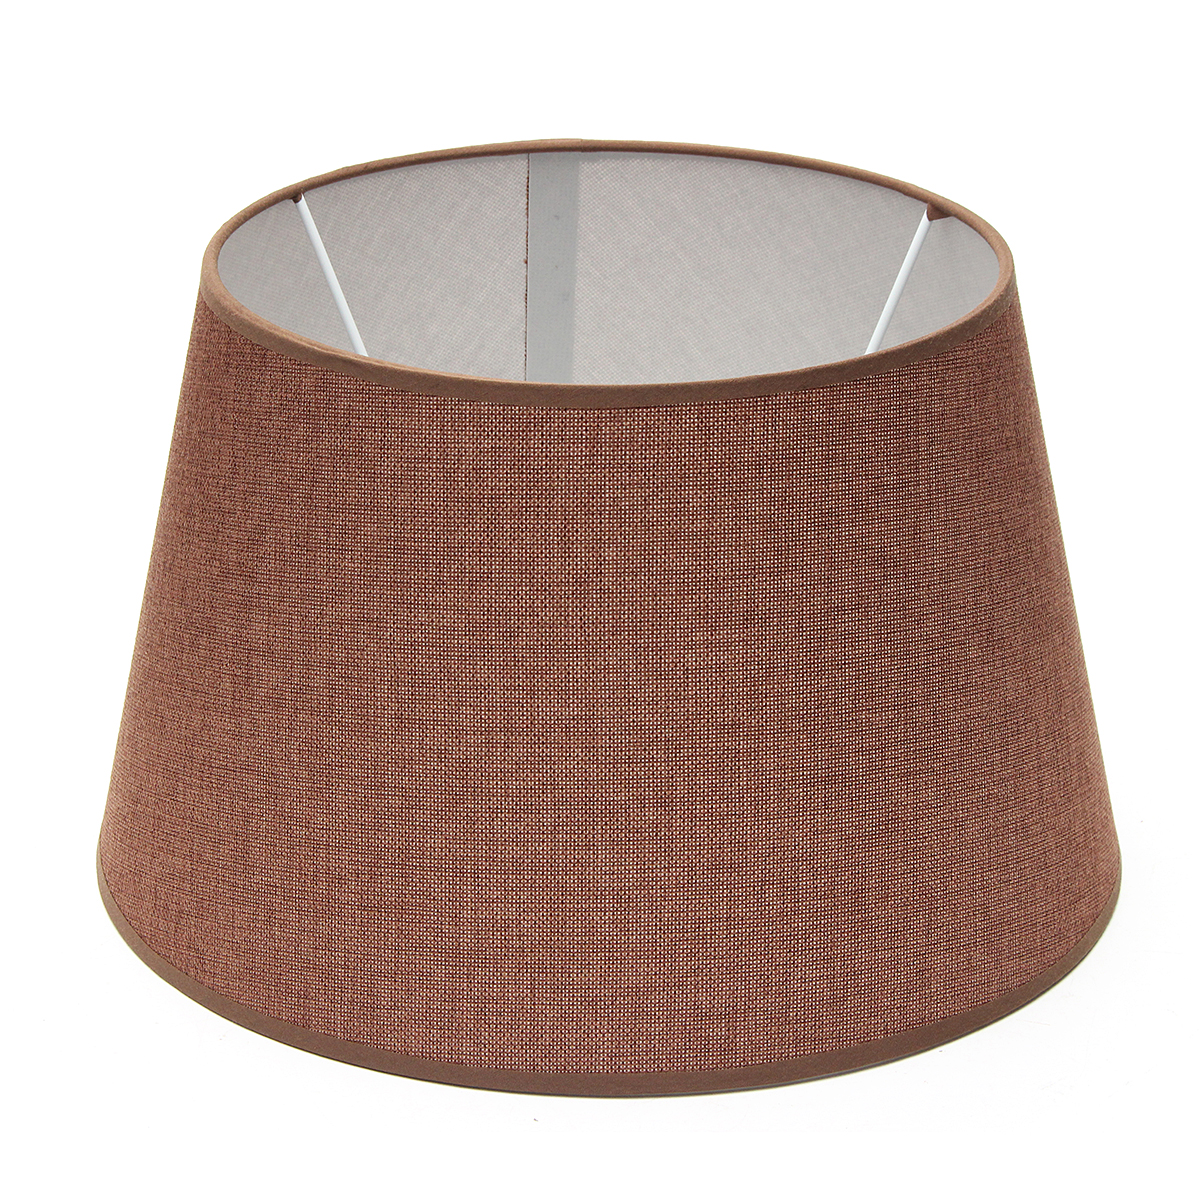 265x355x215MM-Cotton-Textured-Fabric-PVC-Linen-Shade-Desk-Ceiling-Lampshade-1173206